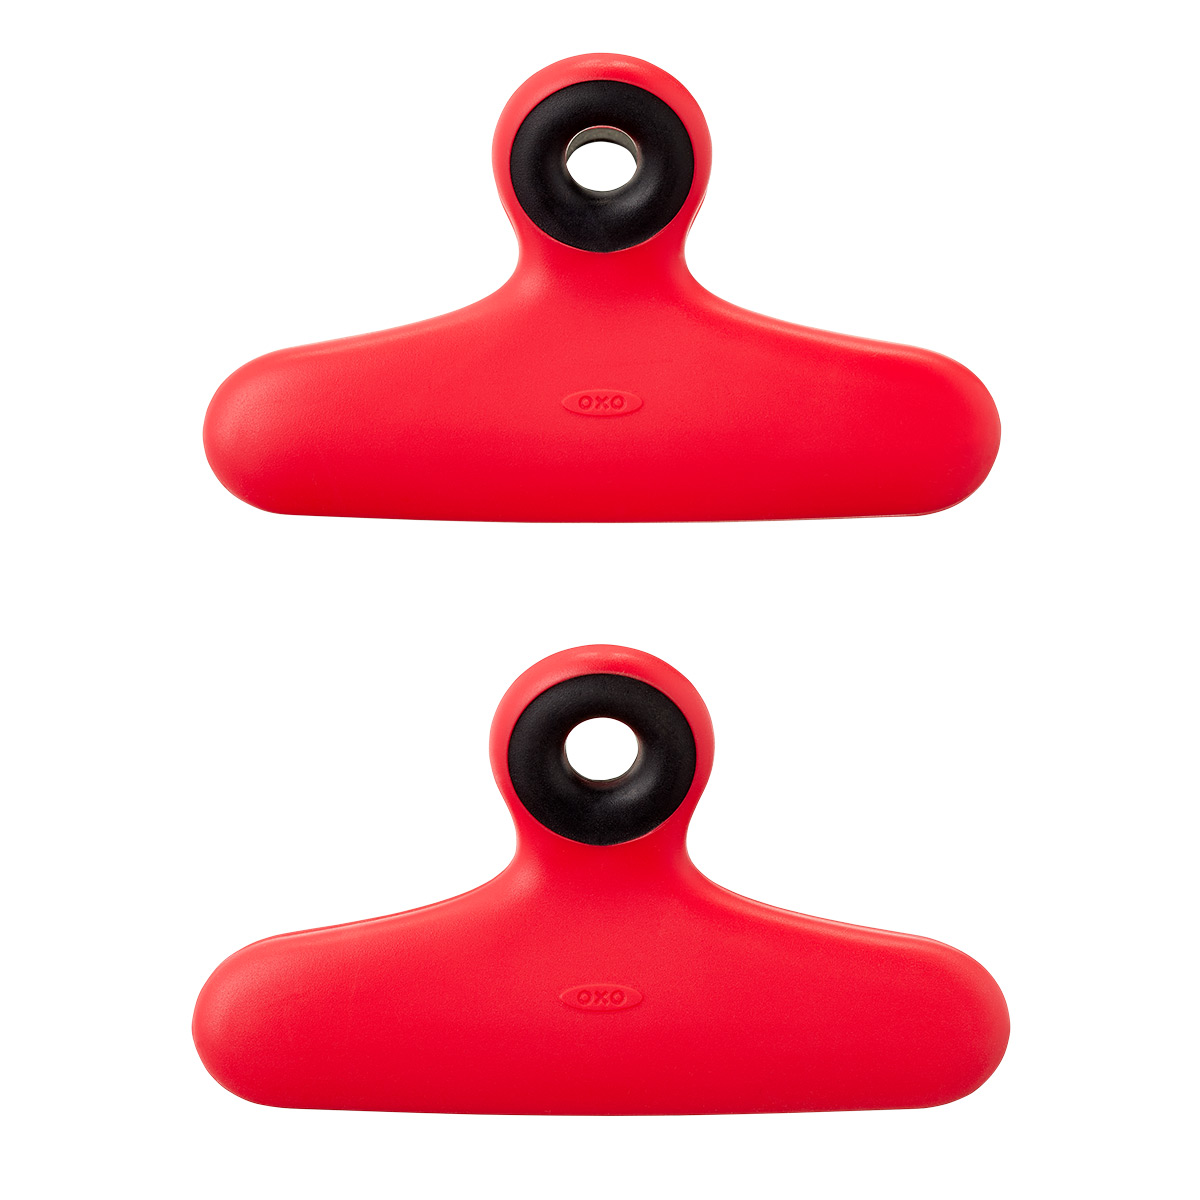 https://www.containerstore.com/catalogimages/441963/10087072_GG_Bag_Clips_Red_2_Pack.jpg